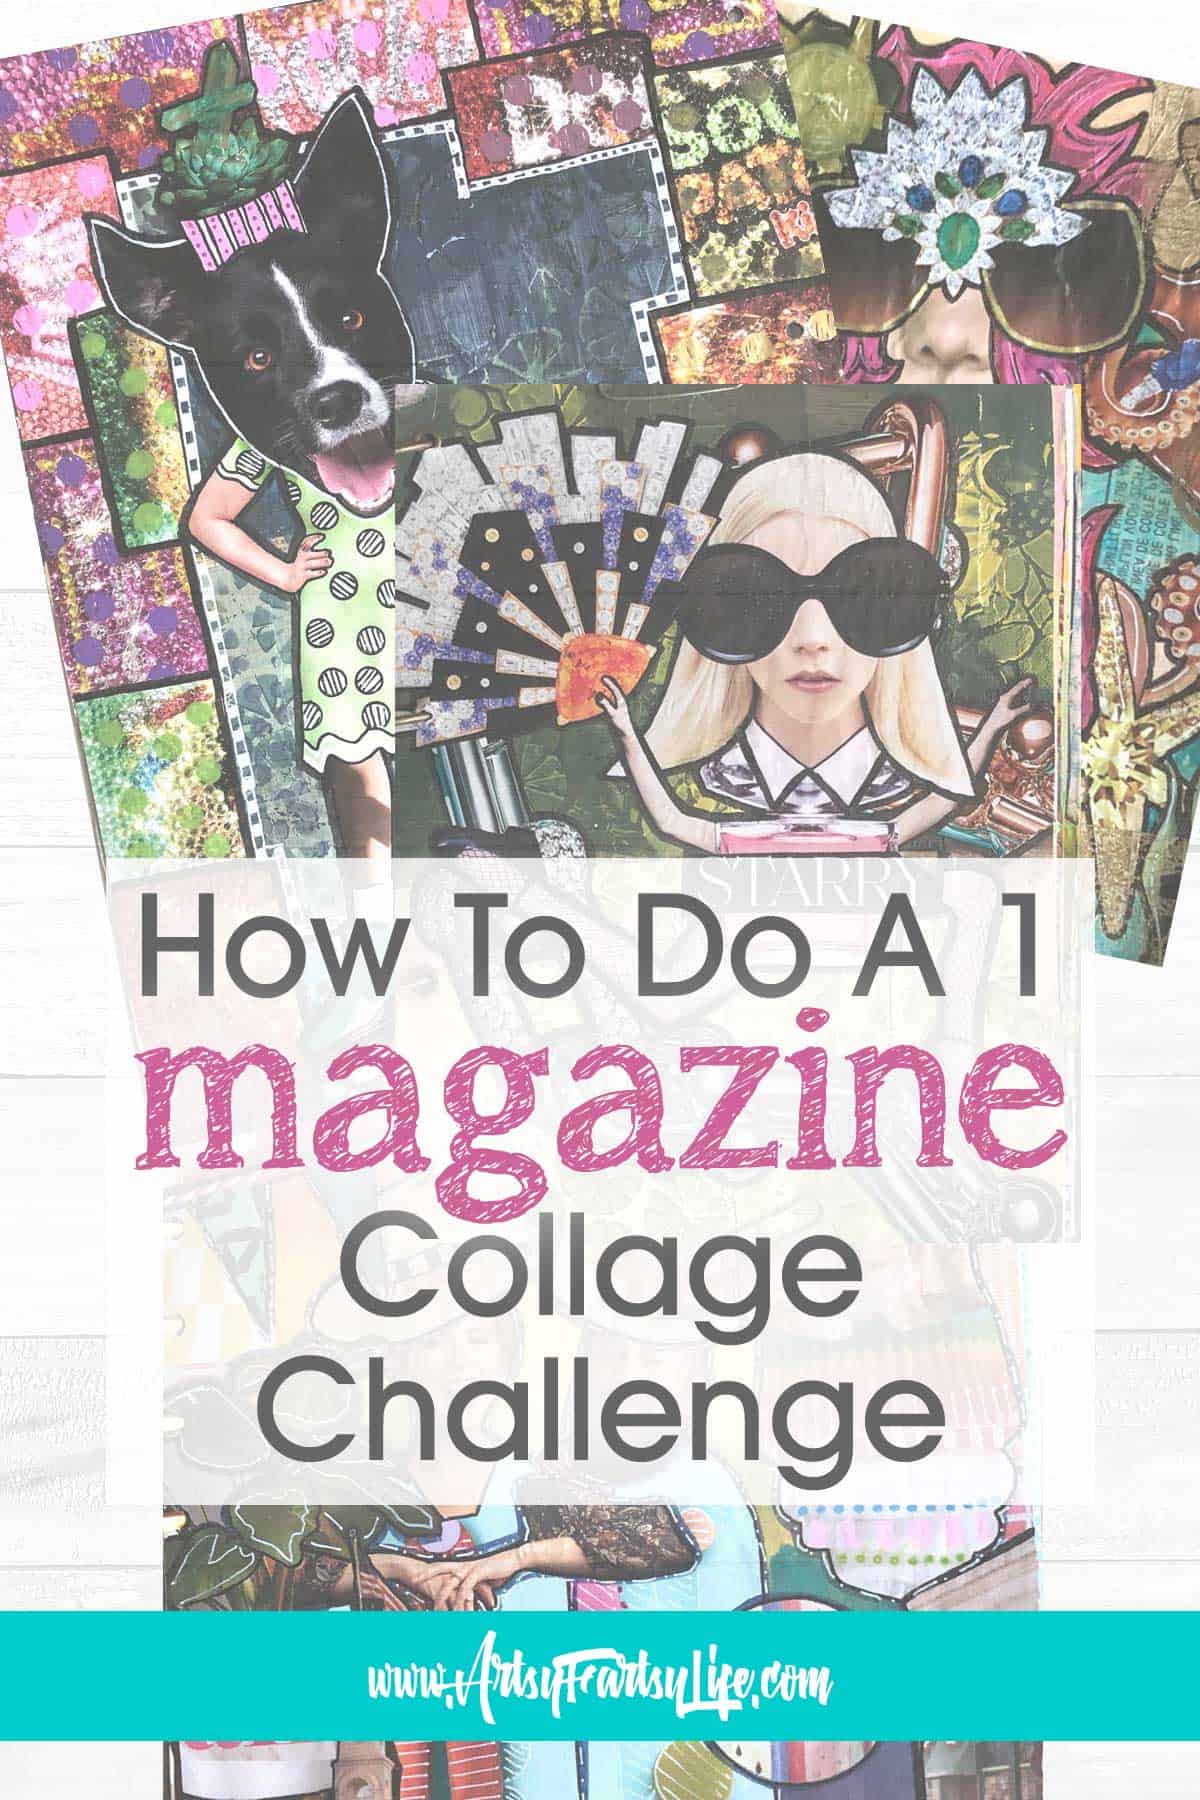 What Is A One Magazine Collage Challenge?